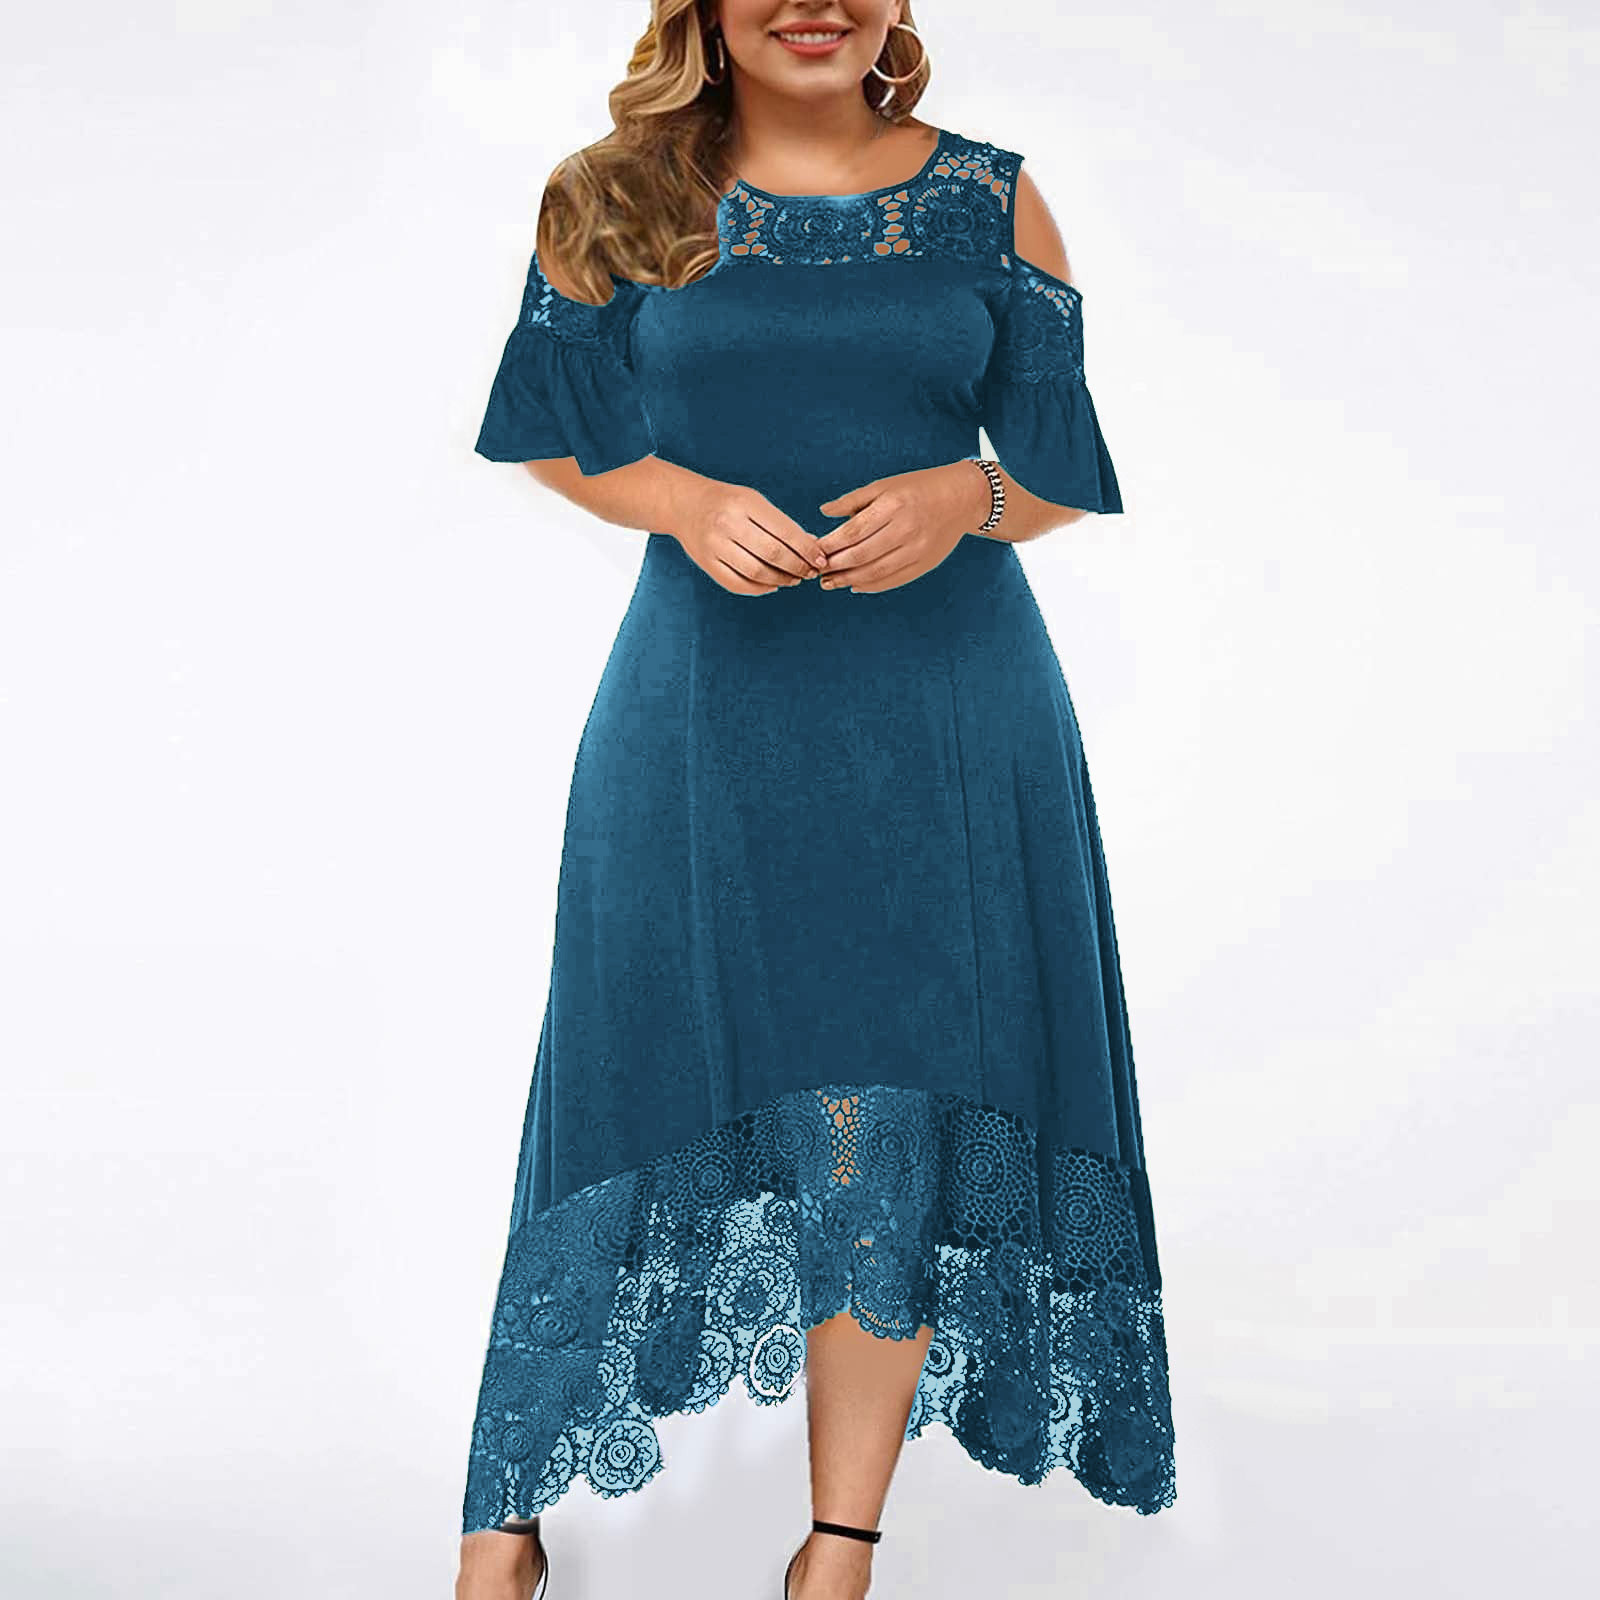 CHGBMOK Plus Size Dresses for Women Cold-Shoulder Ruffle Lace Splicing ...